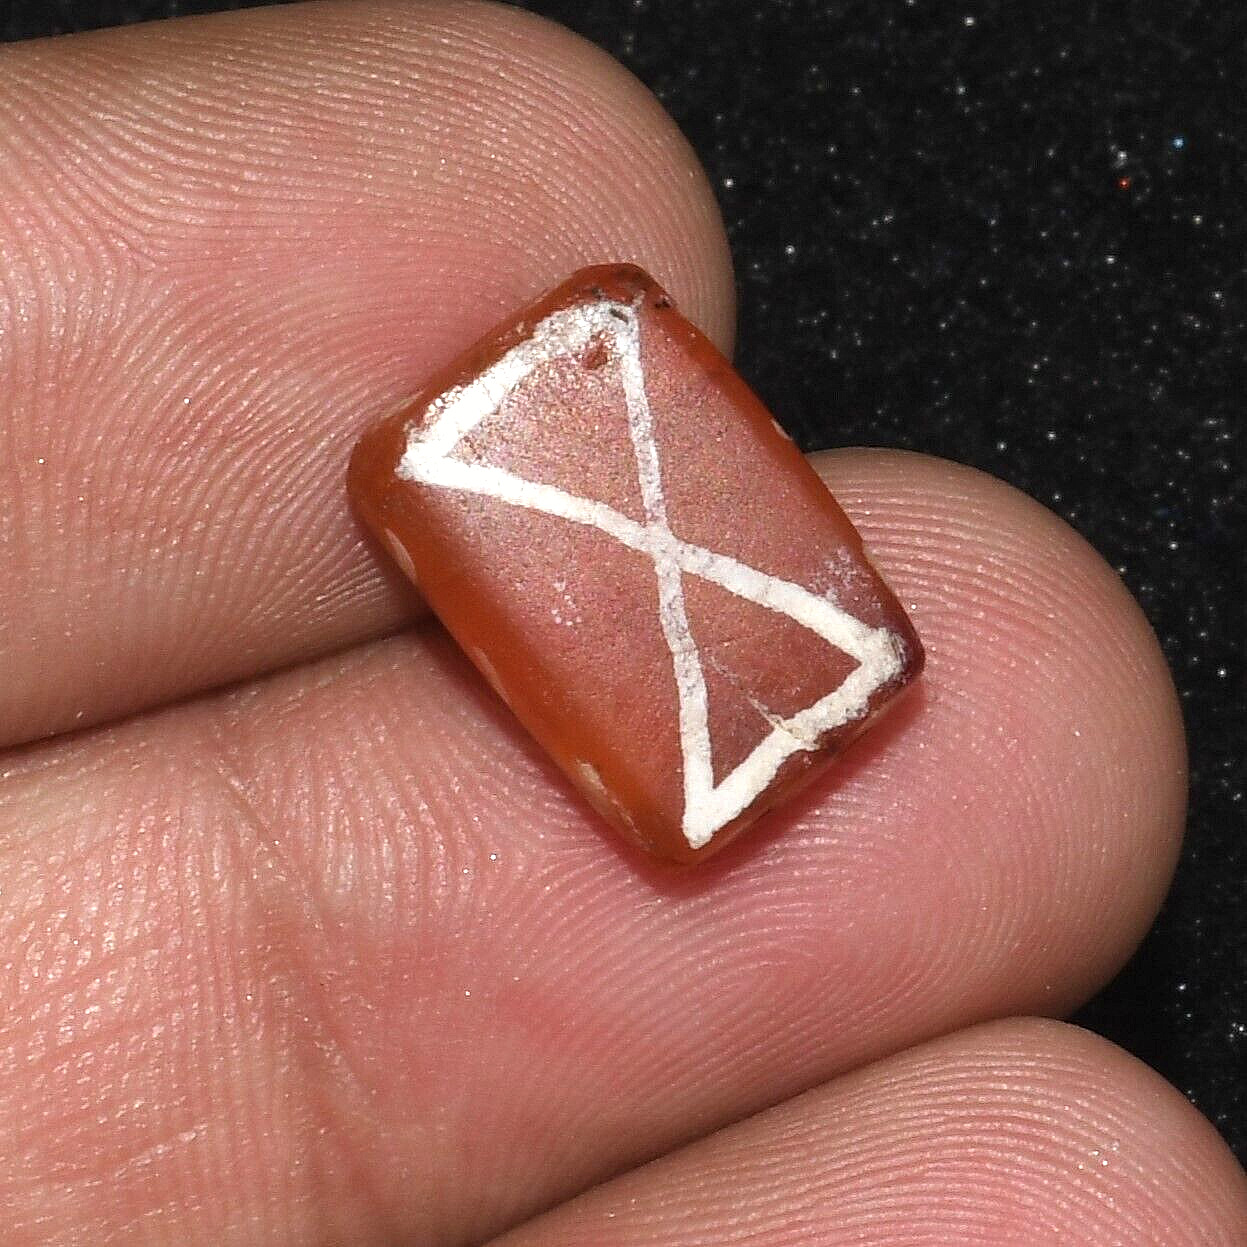 Ancient Etched Carnelian Infinity Bead in Perfect Condition over 2000 Years Old